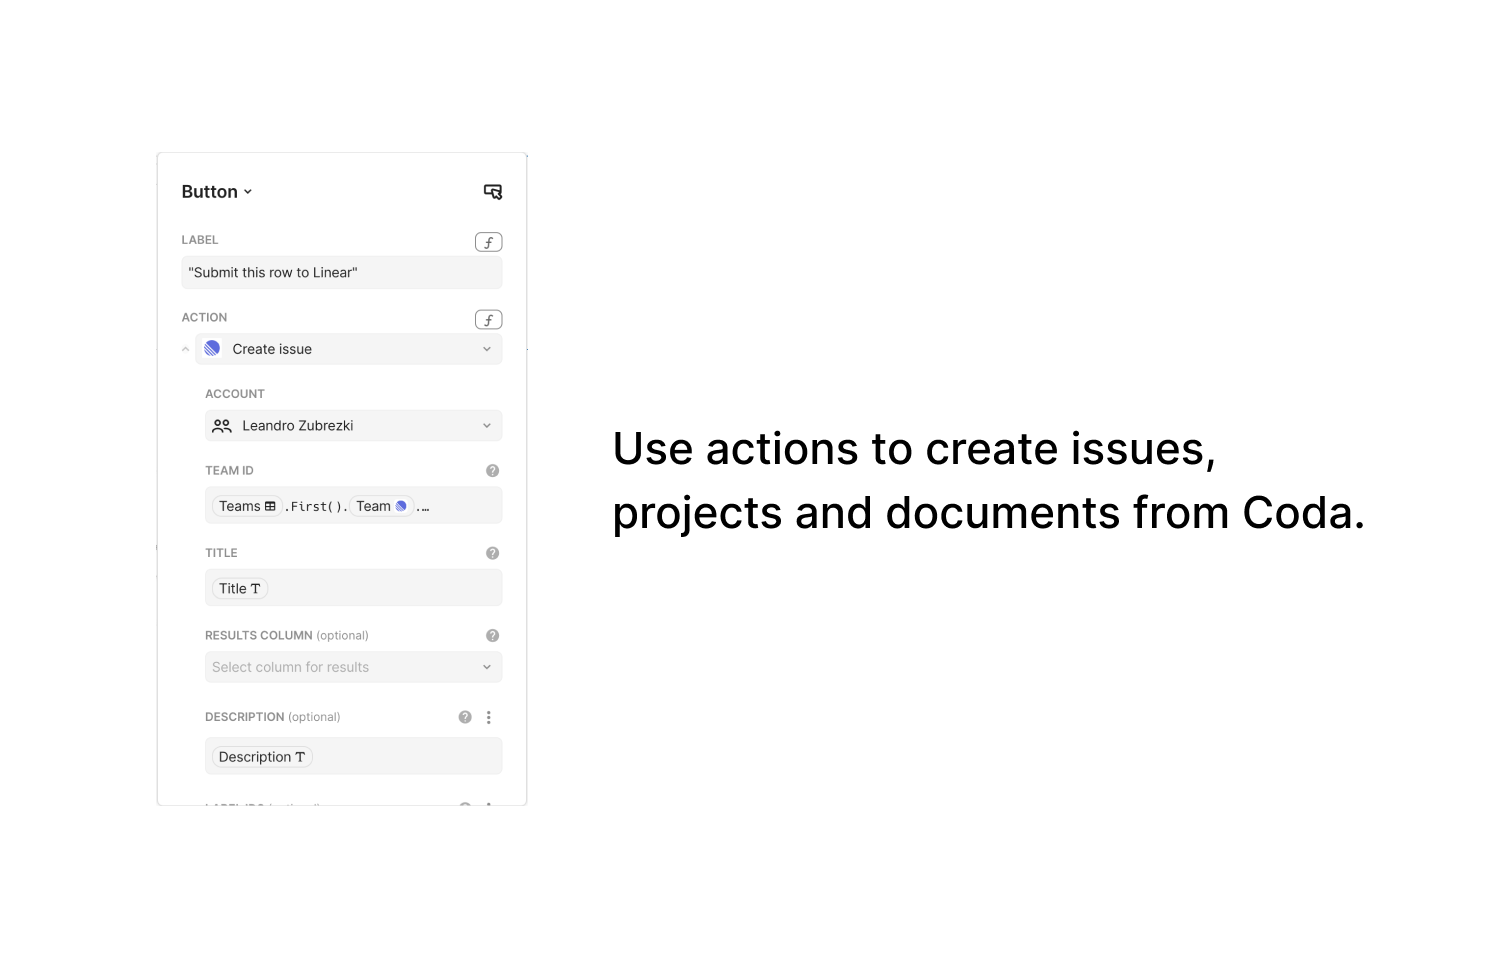 Using actions to create issues, projects and documents from Coda